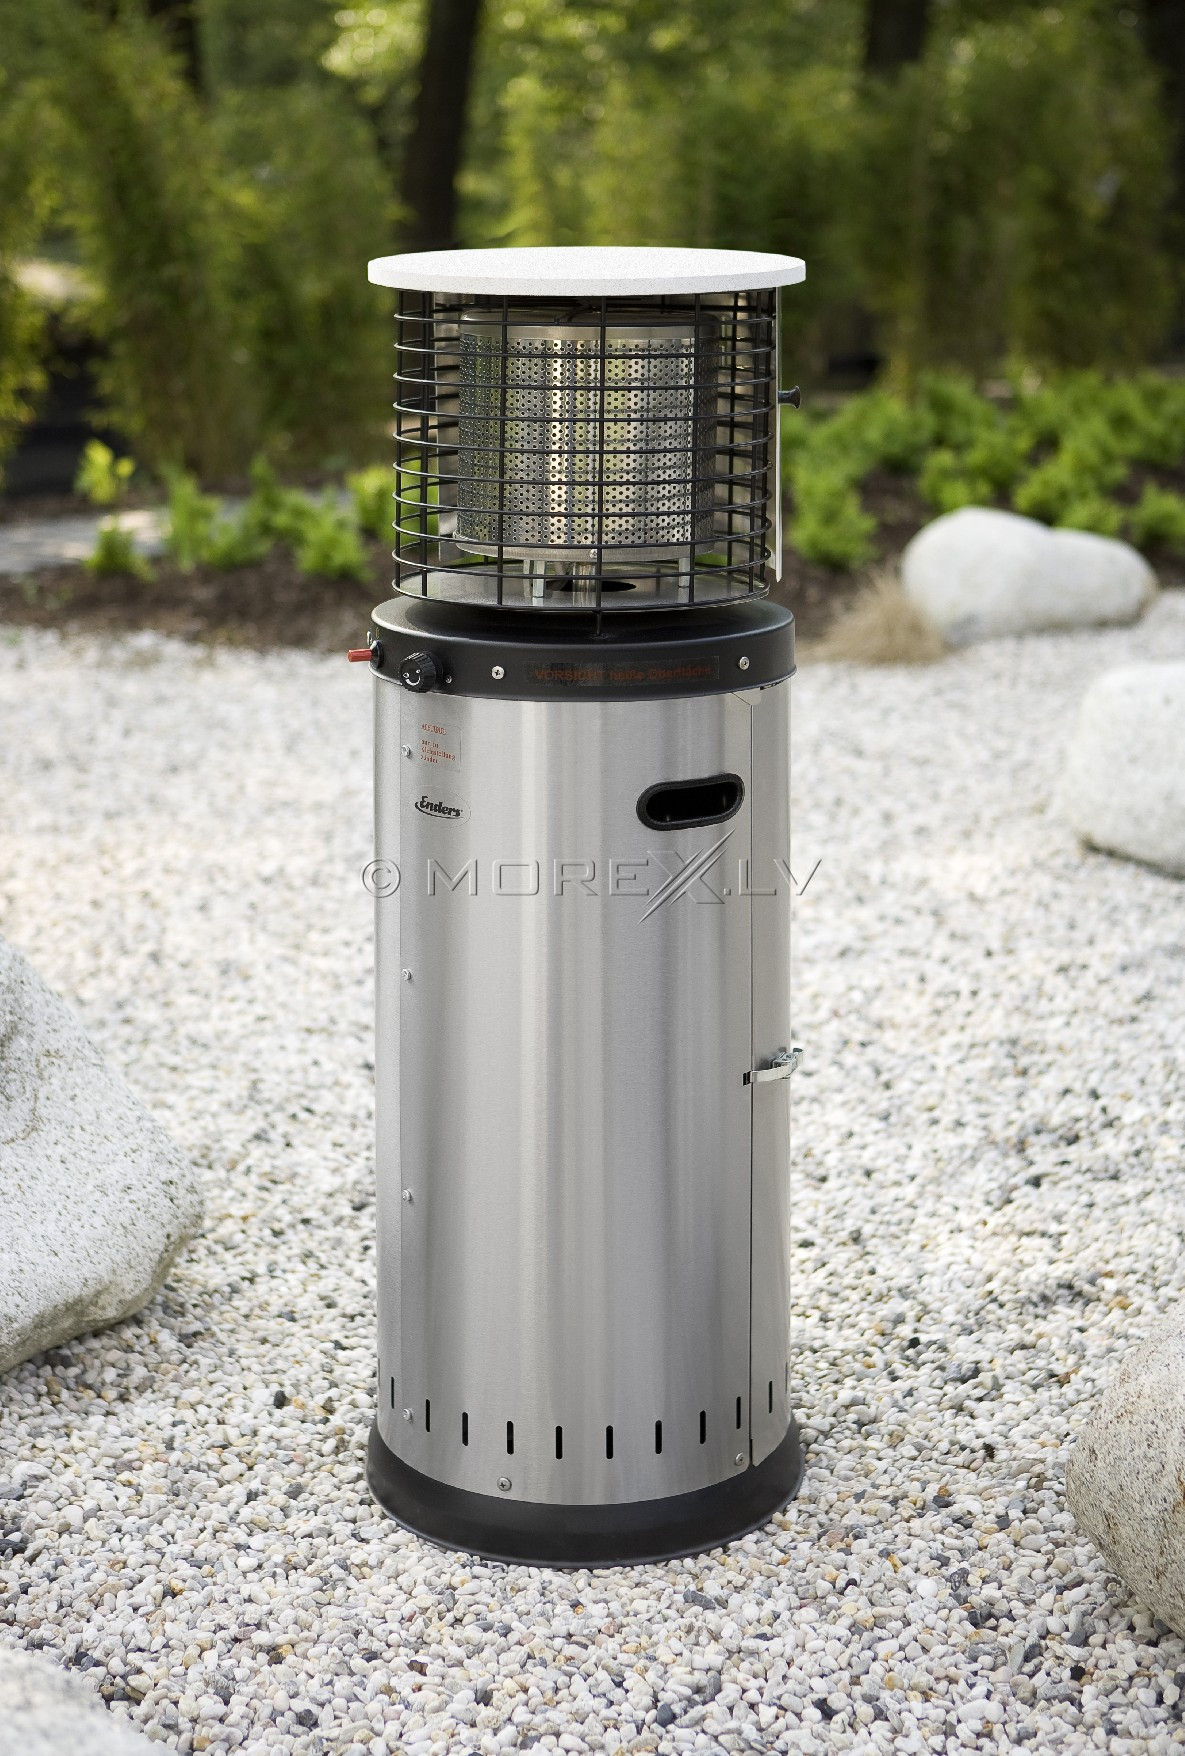 ENDERS POLO 2.0 GAS OUTDOOR HEATER 3-6kW